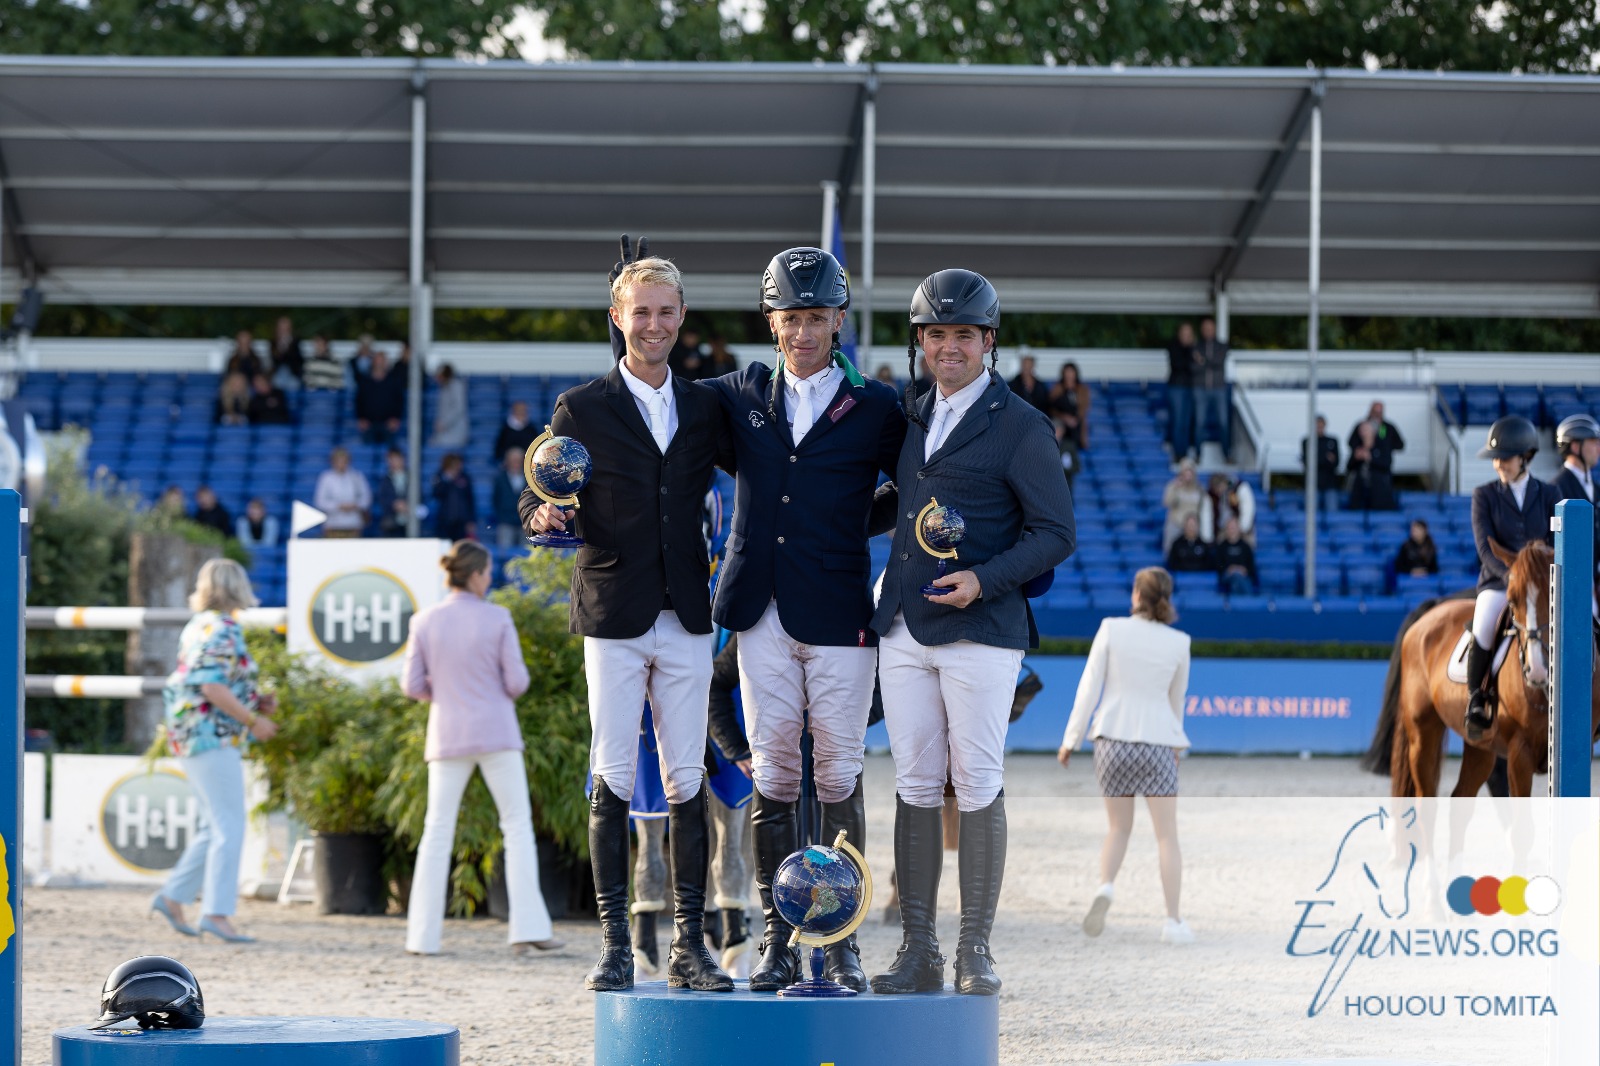 Denis Lynch steers Cornets Iberio to victory in Sires of the World at Lanaken